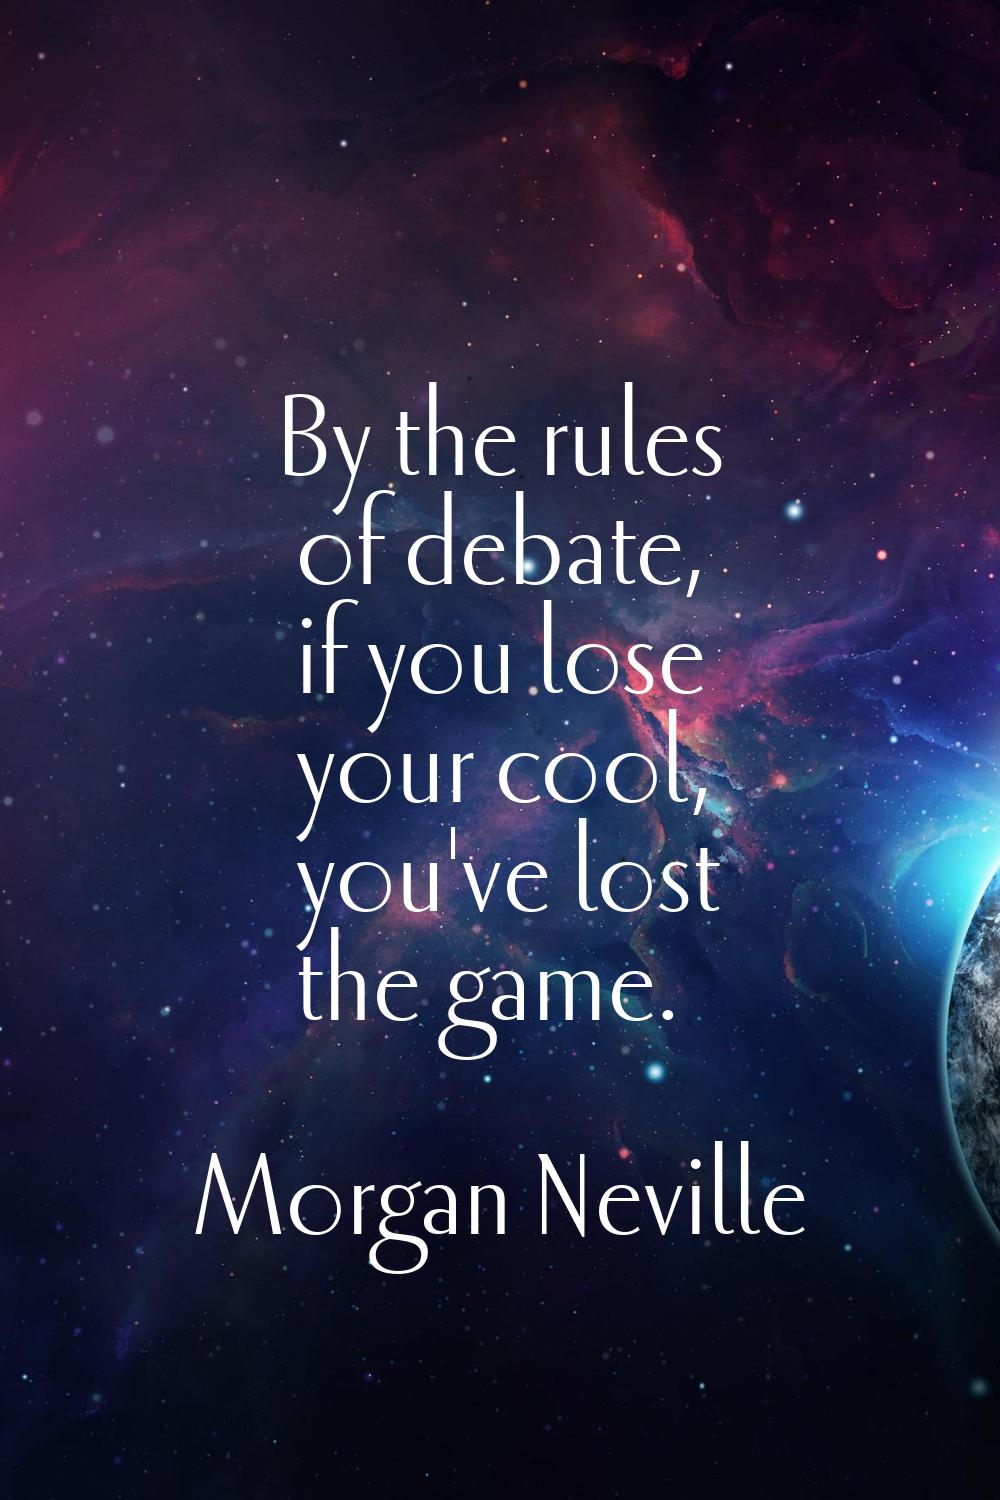 By the rules of debate, if you lose your cool, you've lost the game.